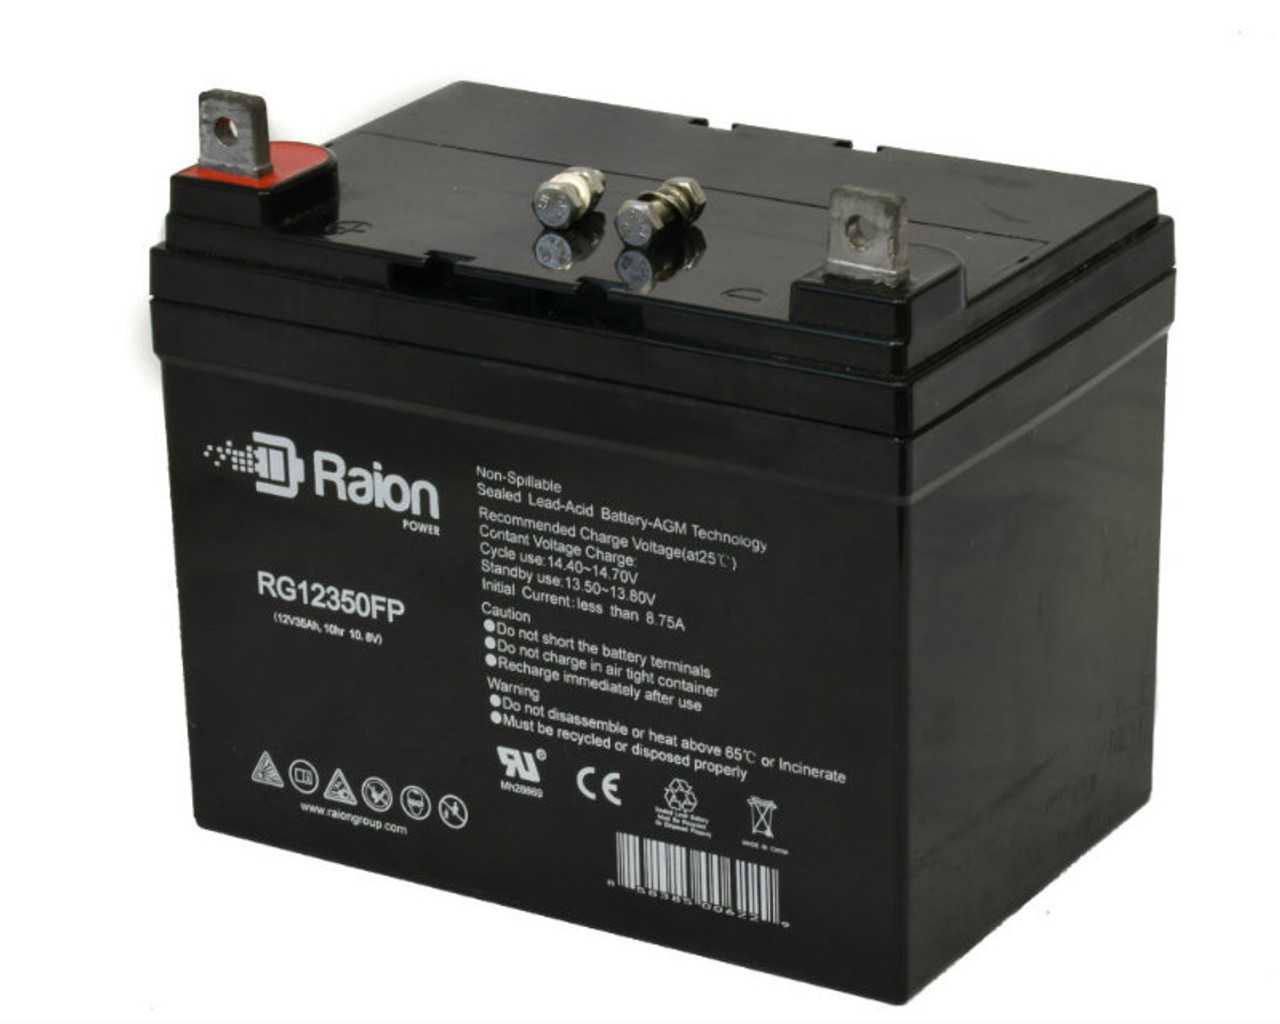 Raion Power Replacement 12V 35Ah RG12350FP Battery for Clipper 7223D